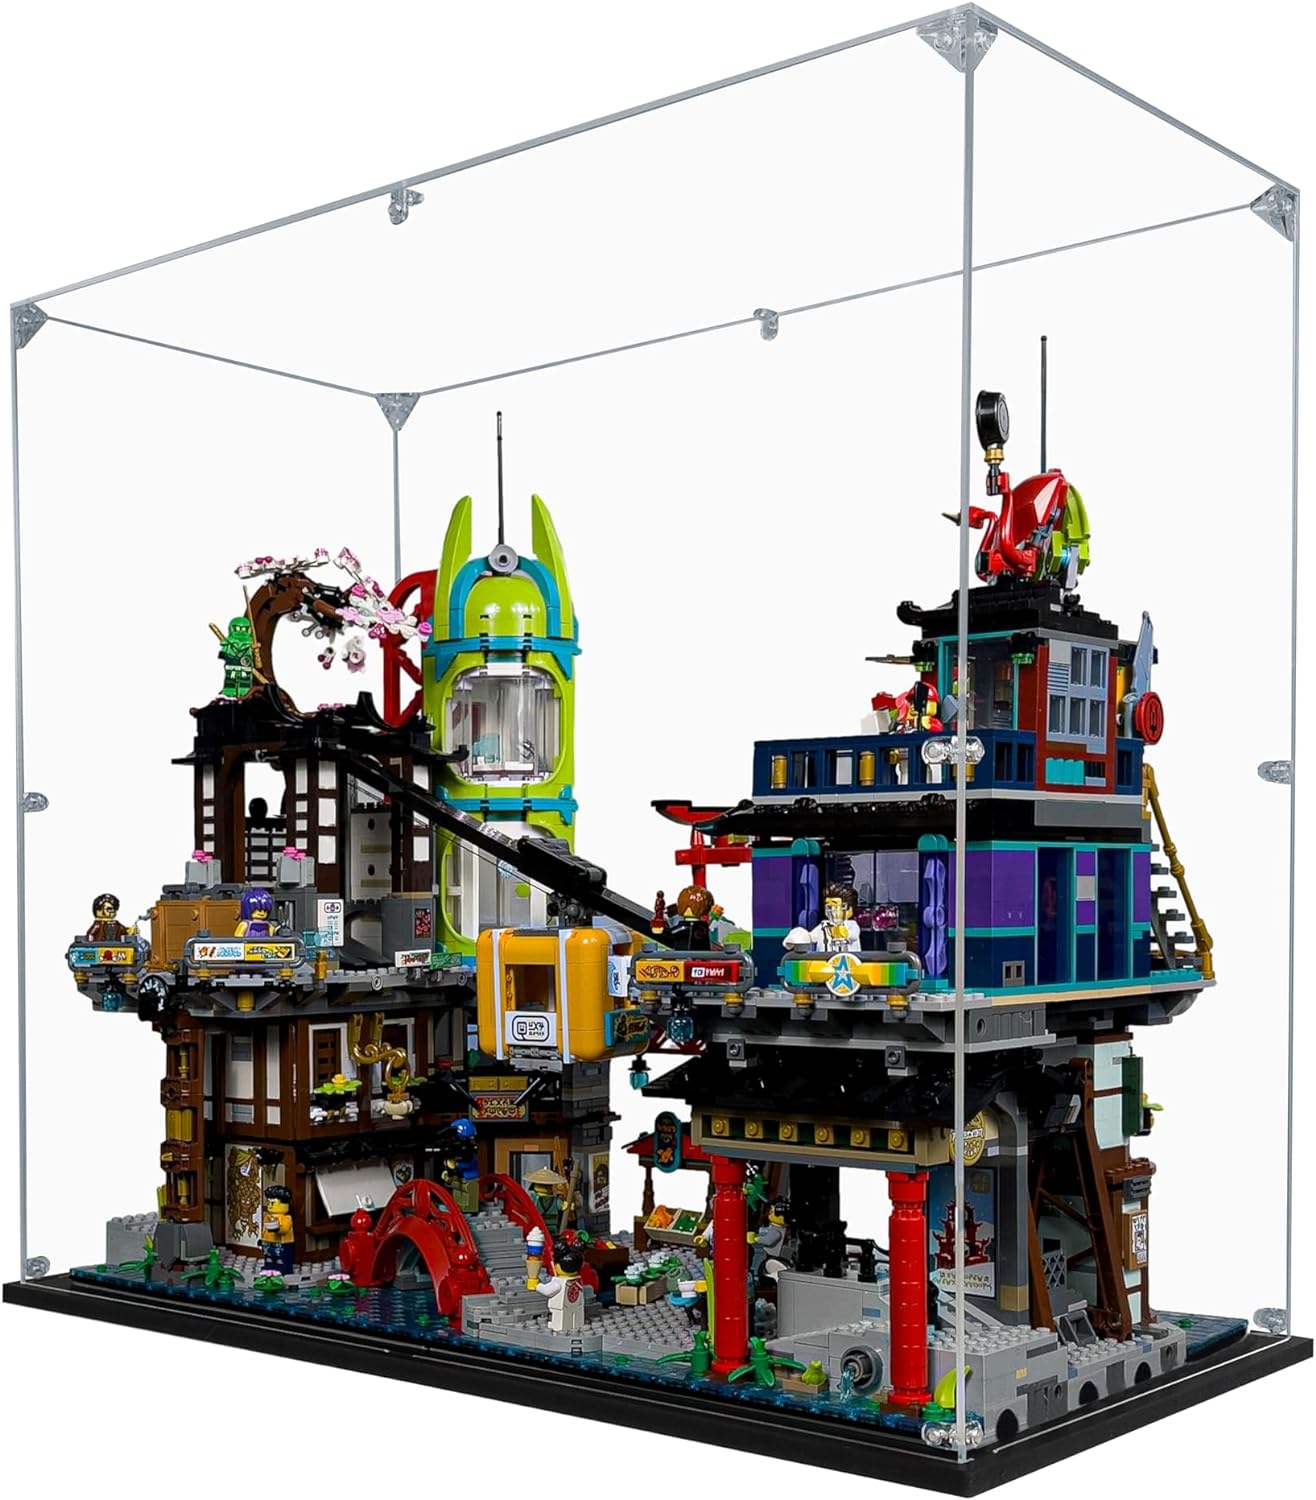 Acrylic Display Case Compatible for Lego NINJAGO City Markets #71799, Dustproof Display Case (Case Only) (Lego Sets are NOT Included)